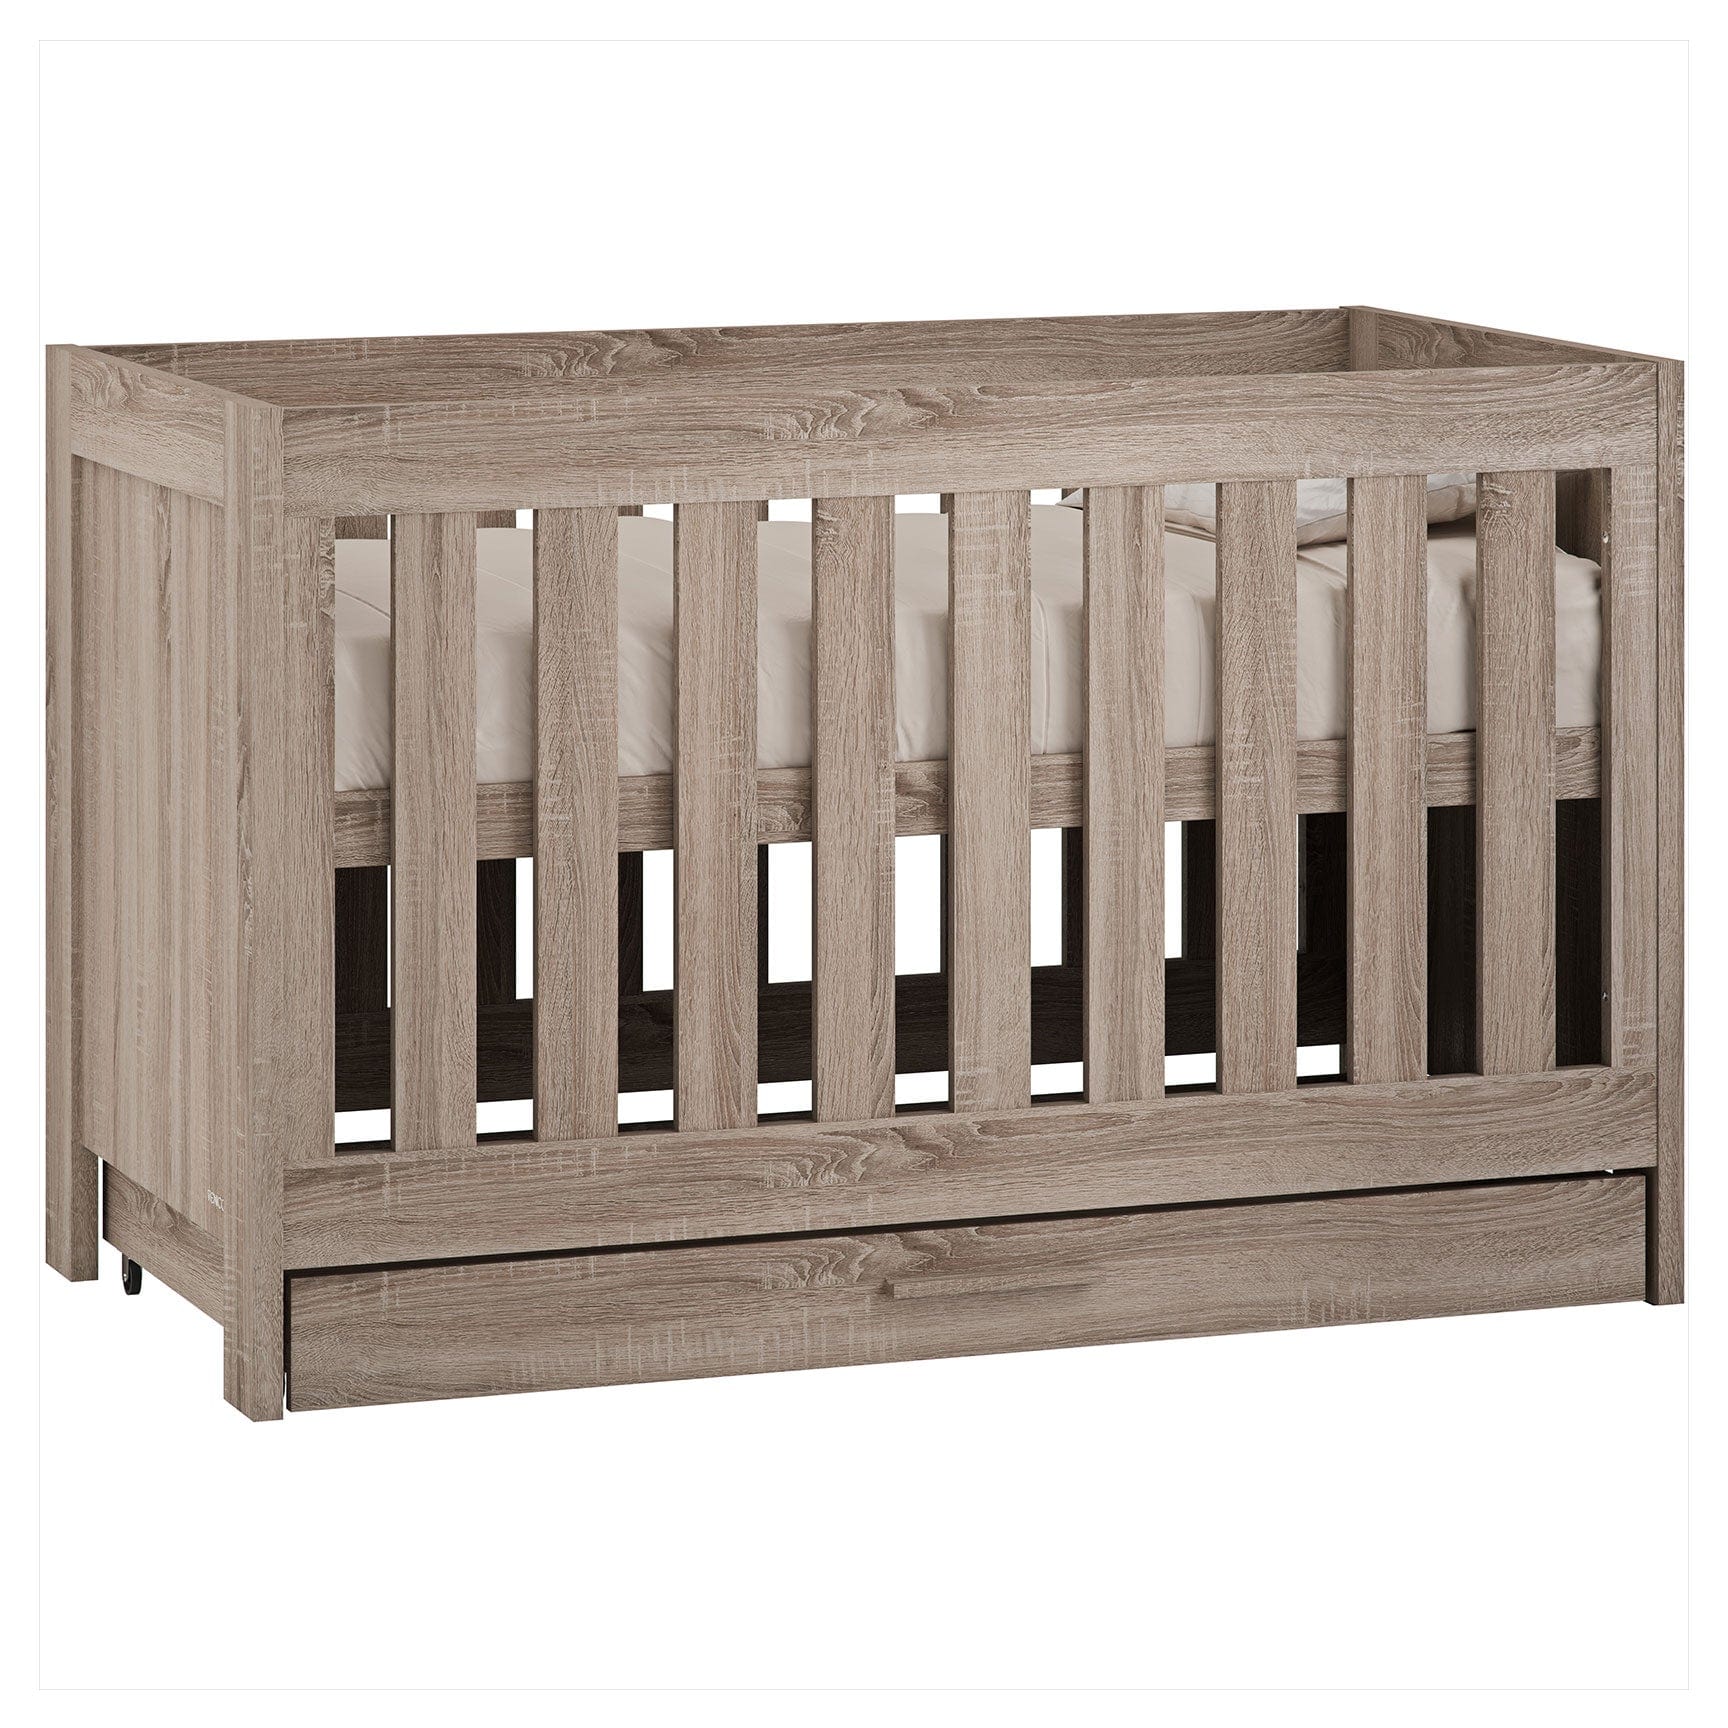 Venicci Forenzo Cot Bed with Drawer in Truffle Oak Cot Beds